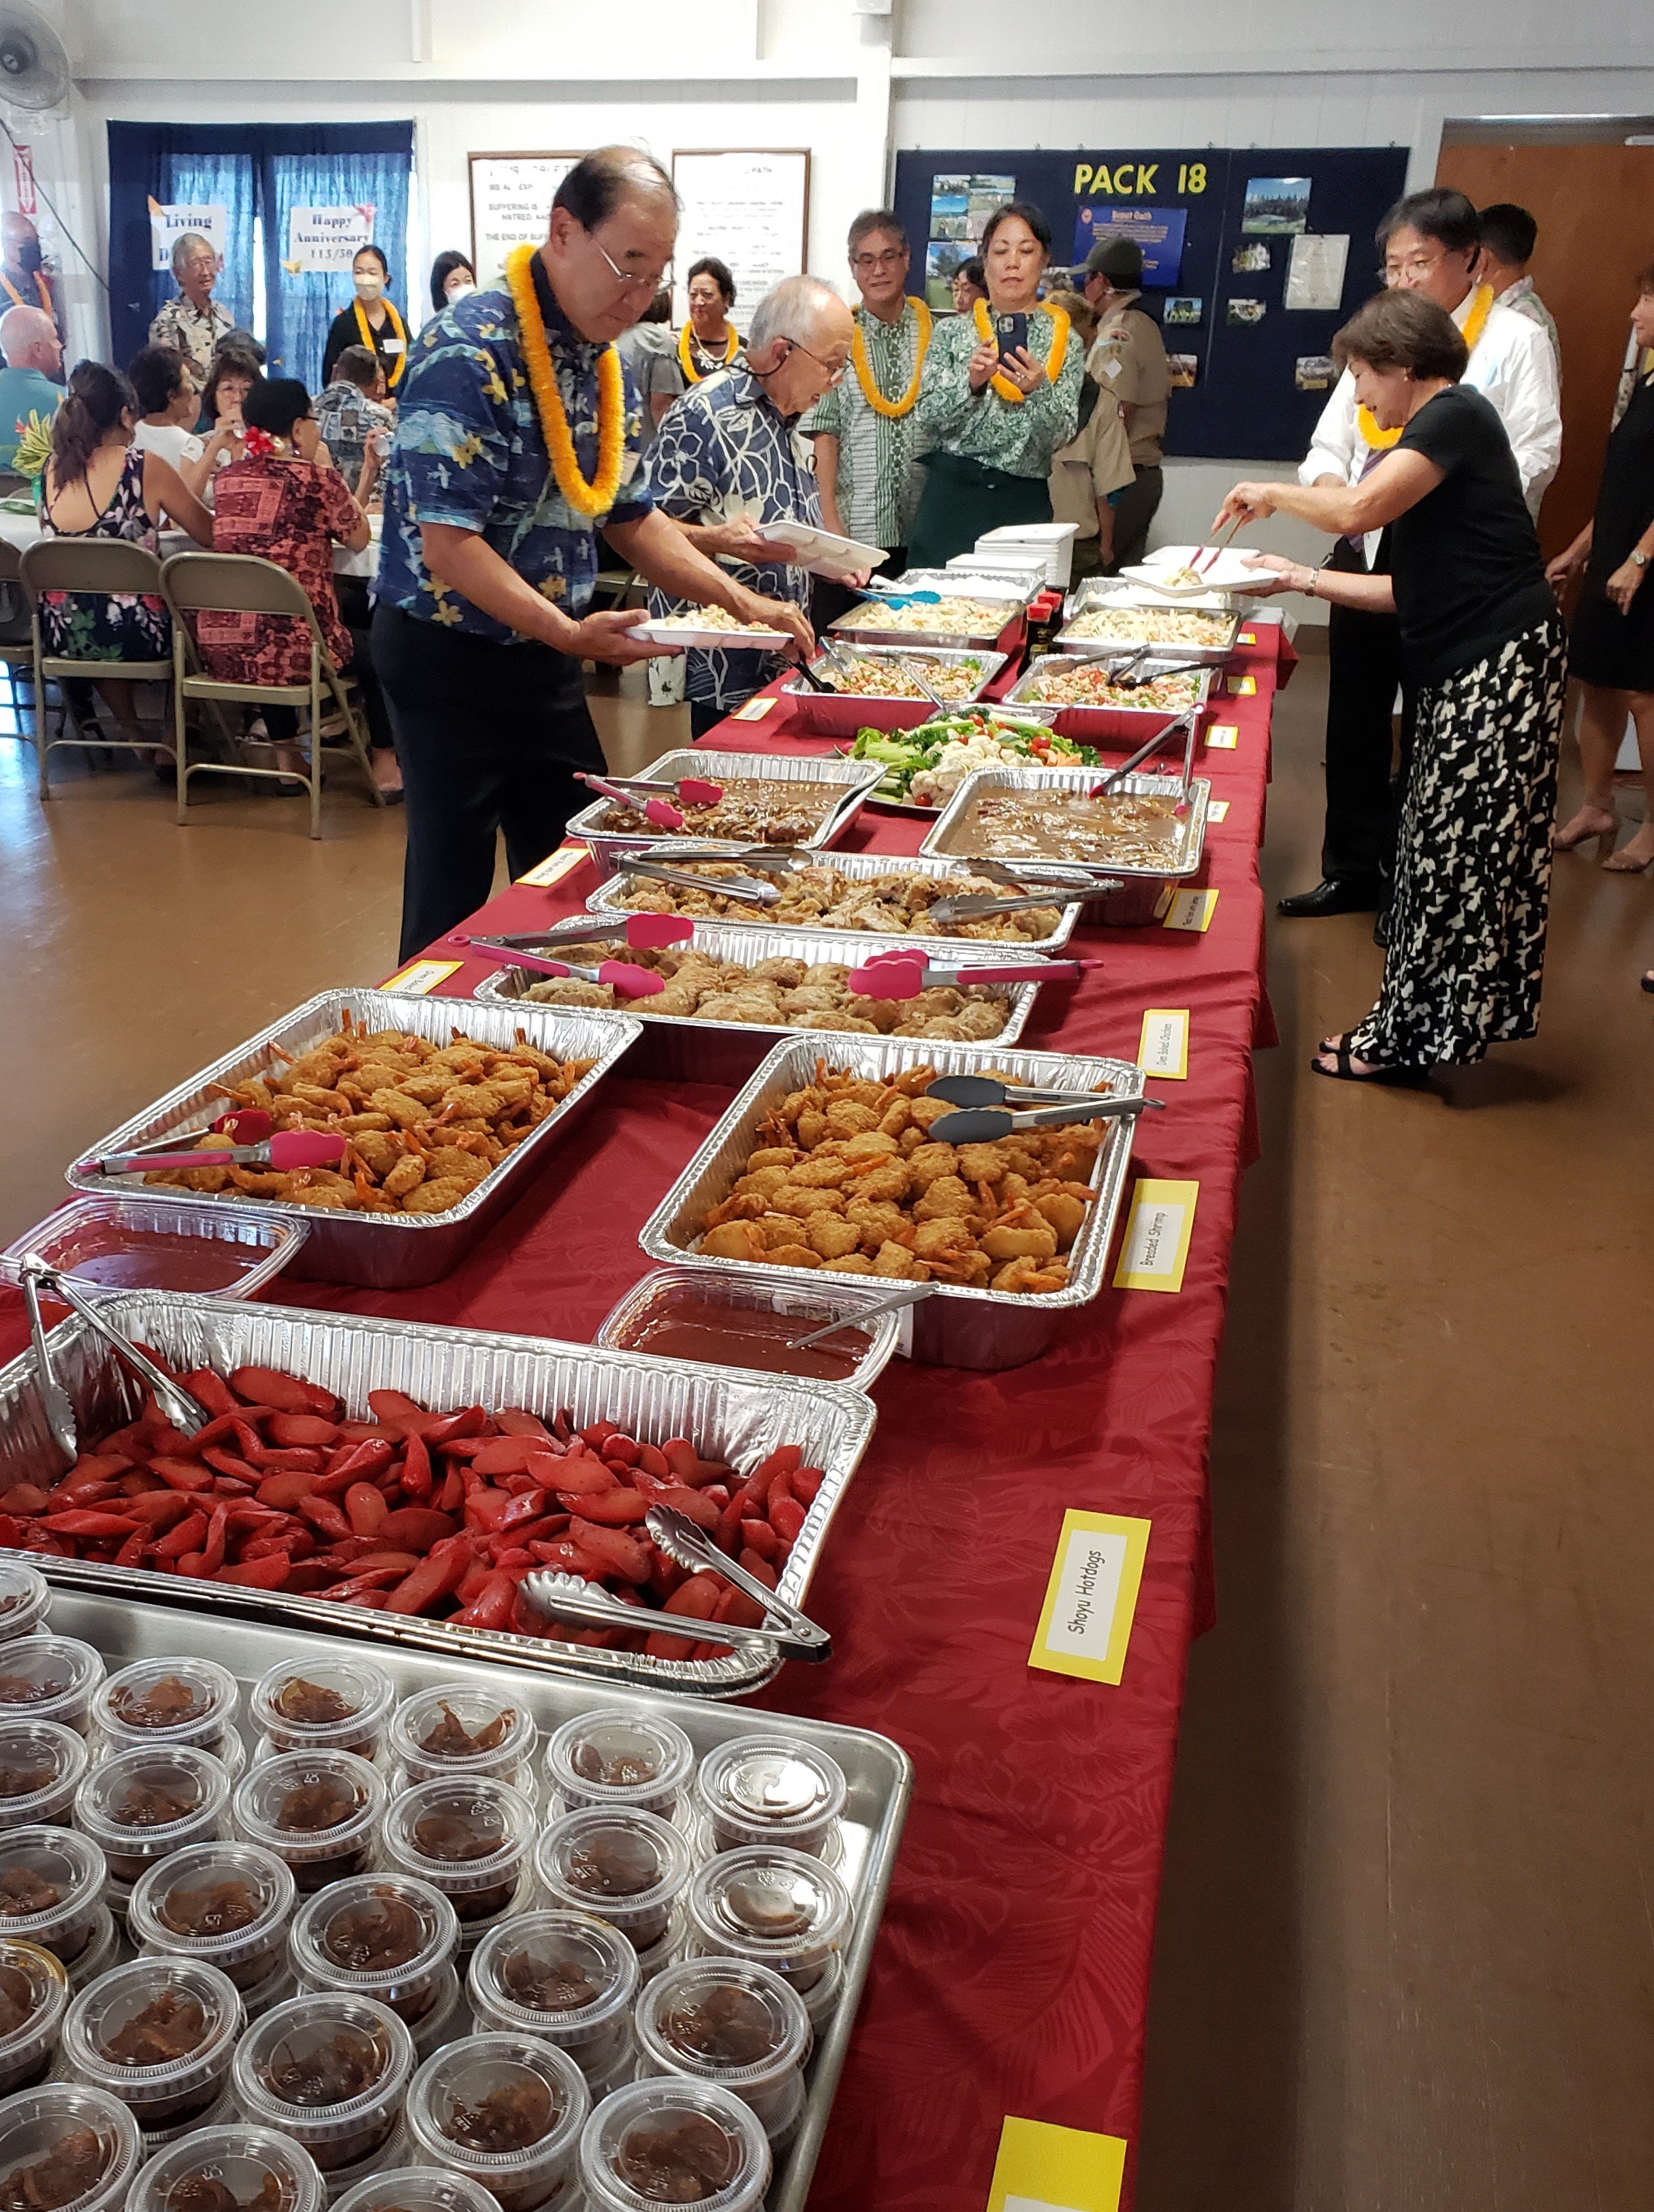   Buffet line with Dr. Warren Tamamoto and other honored guests  